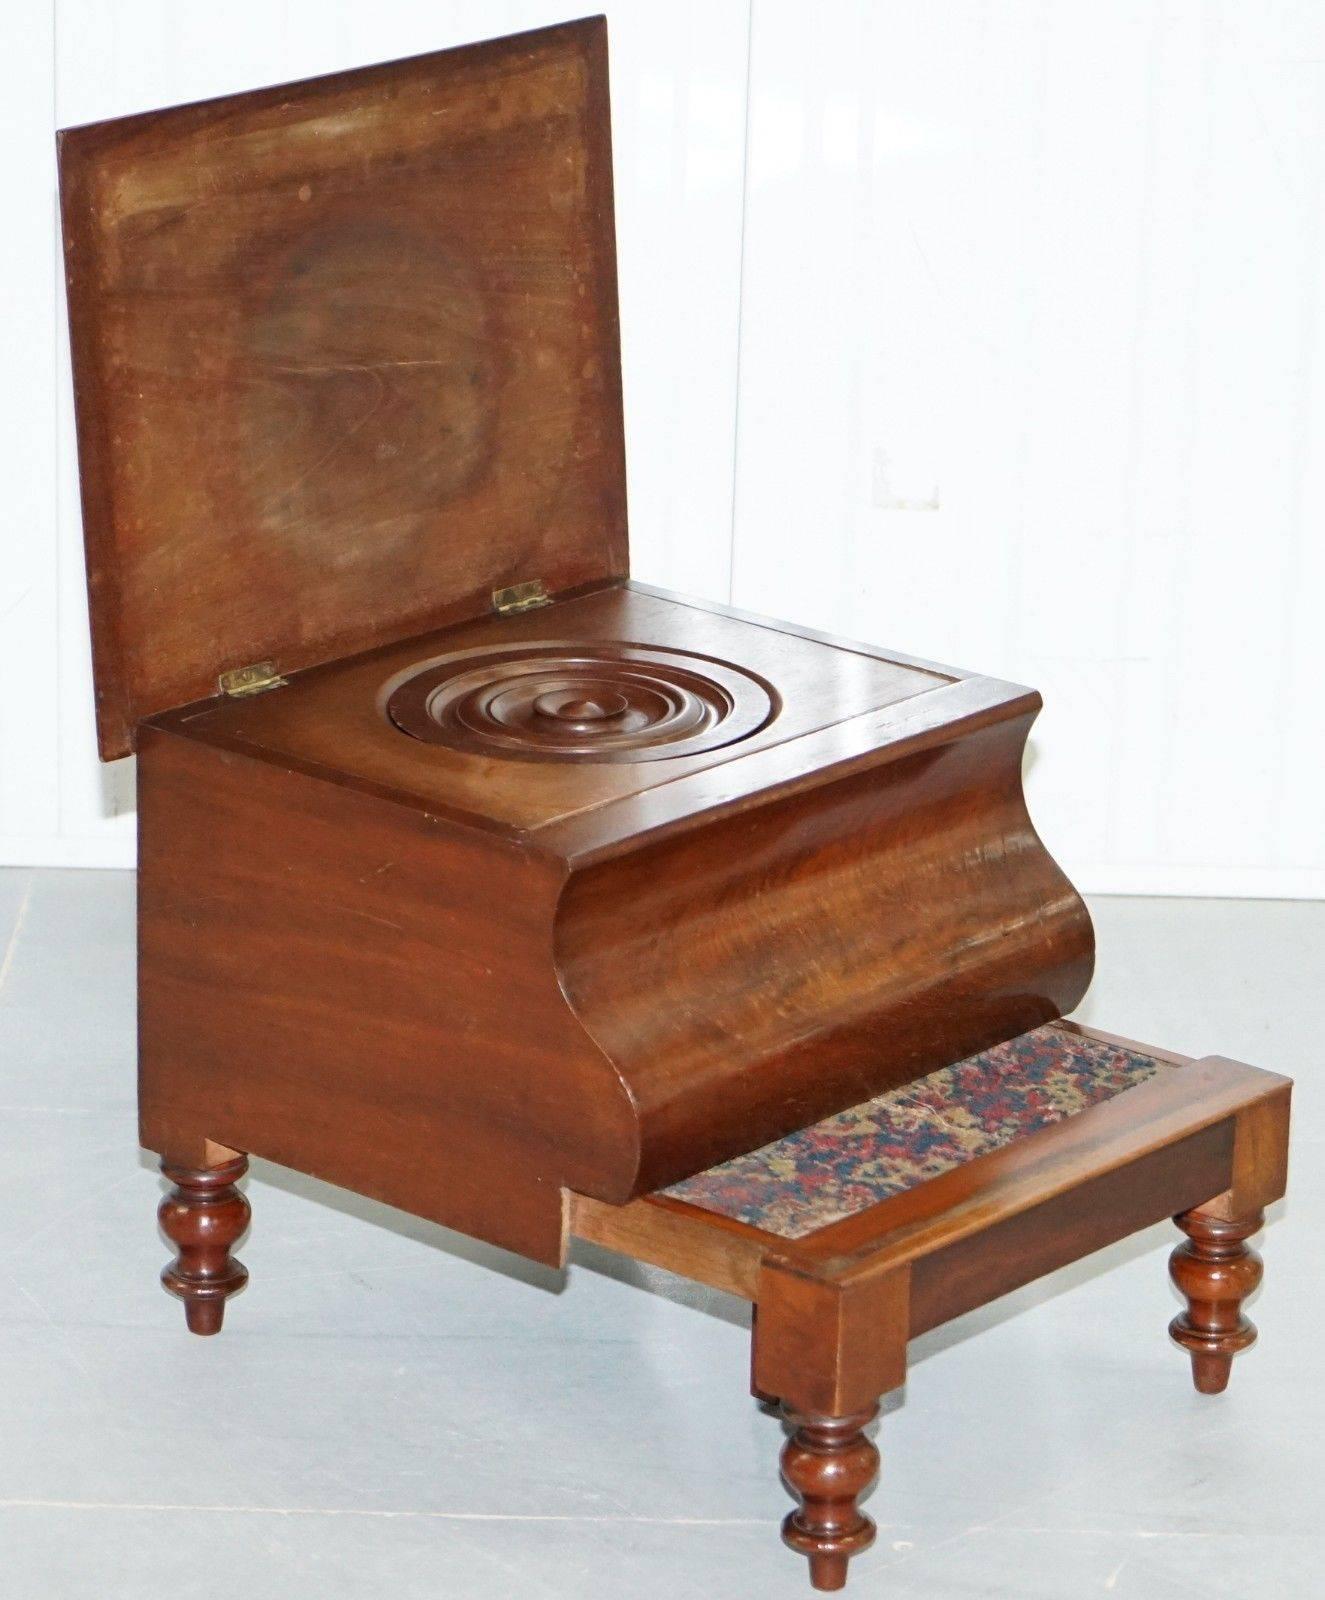 Hand-Crafted Rare Fully Complete Victorian American Bed Step Stool with Built in Chamber Pot